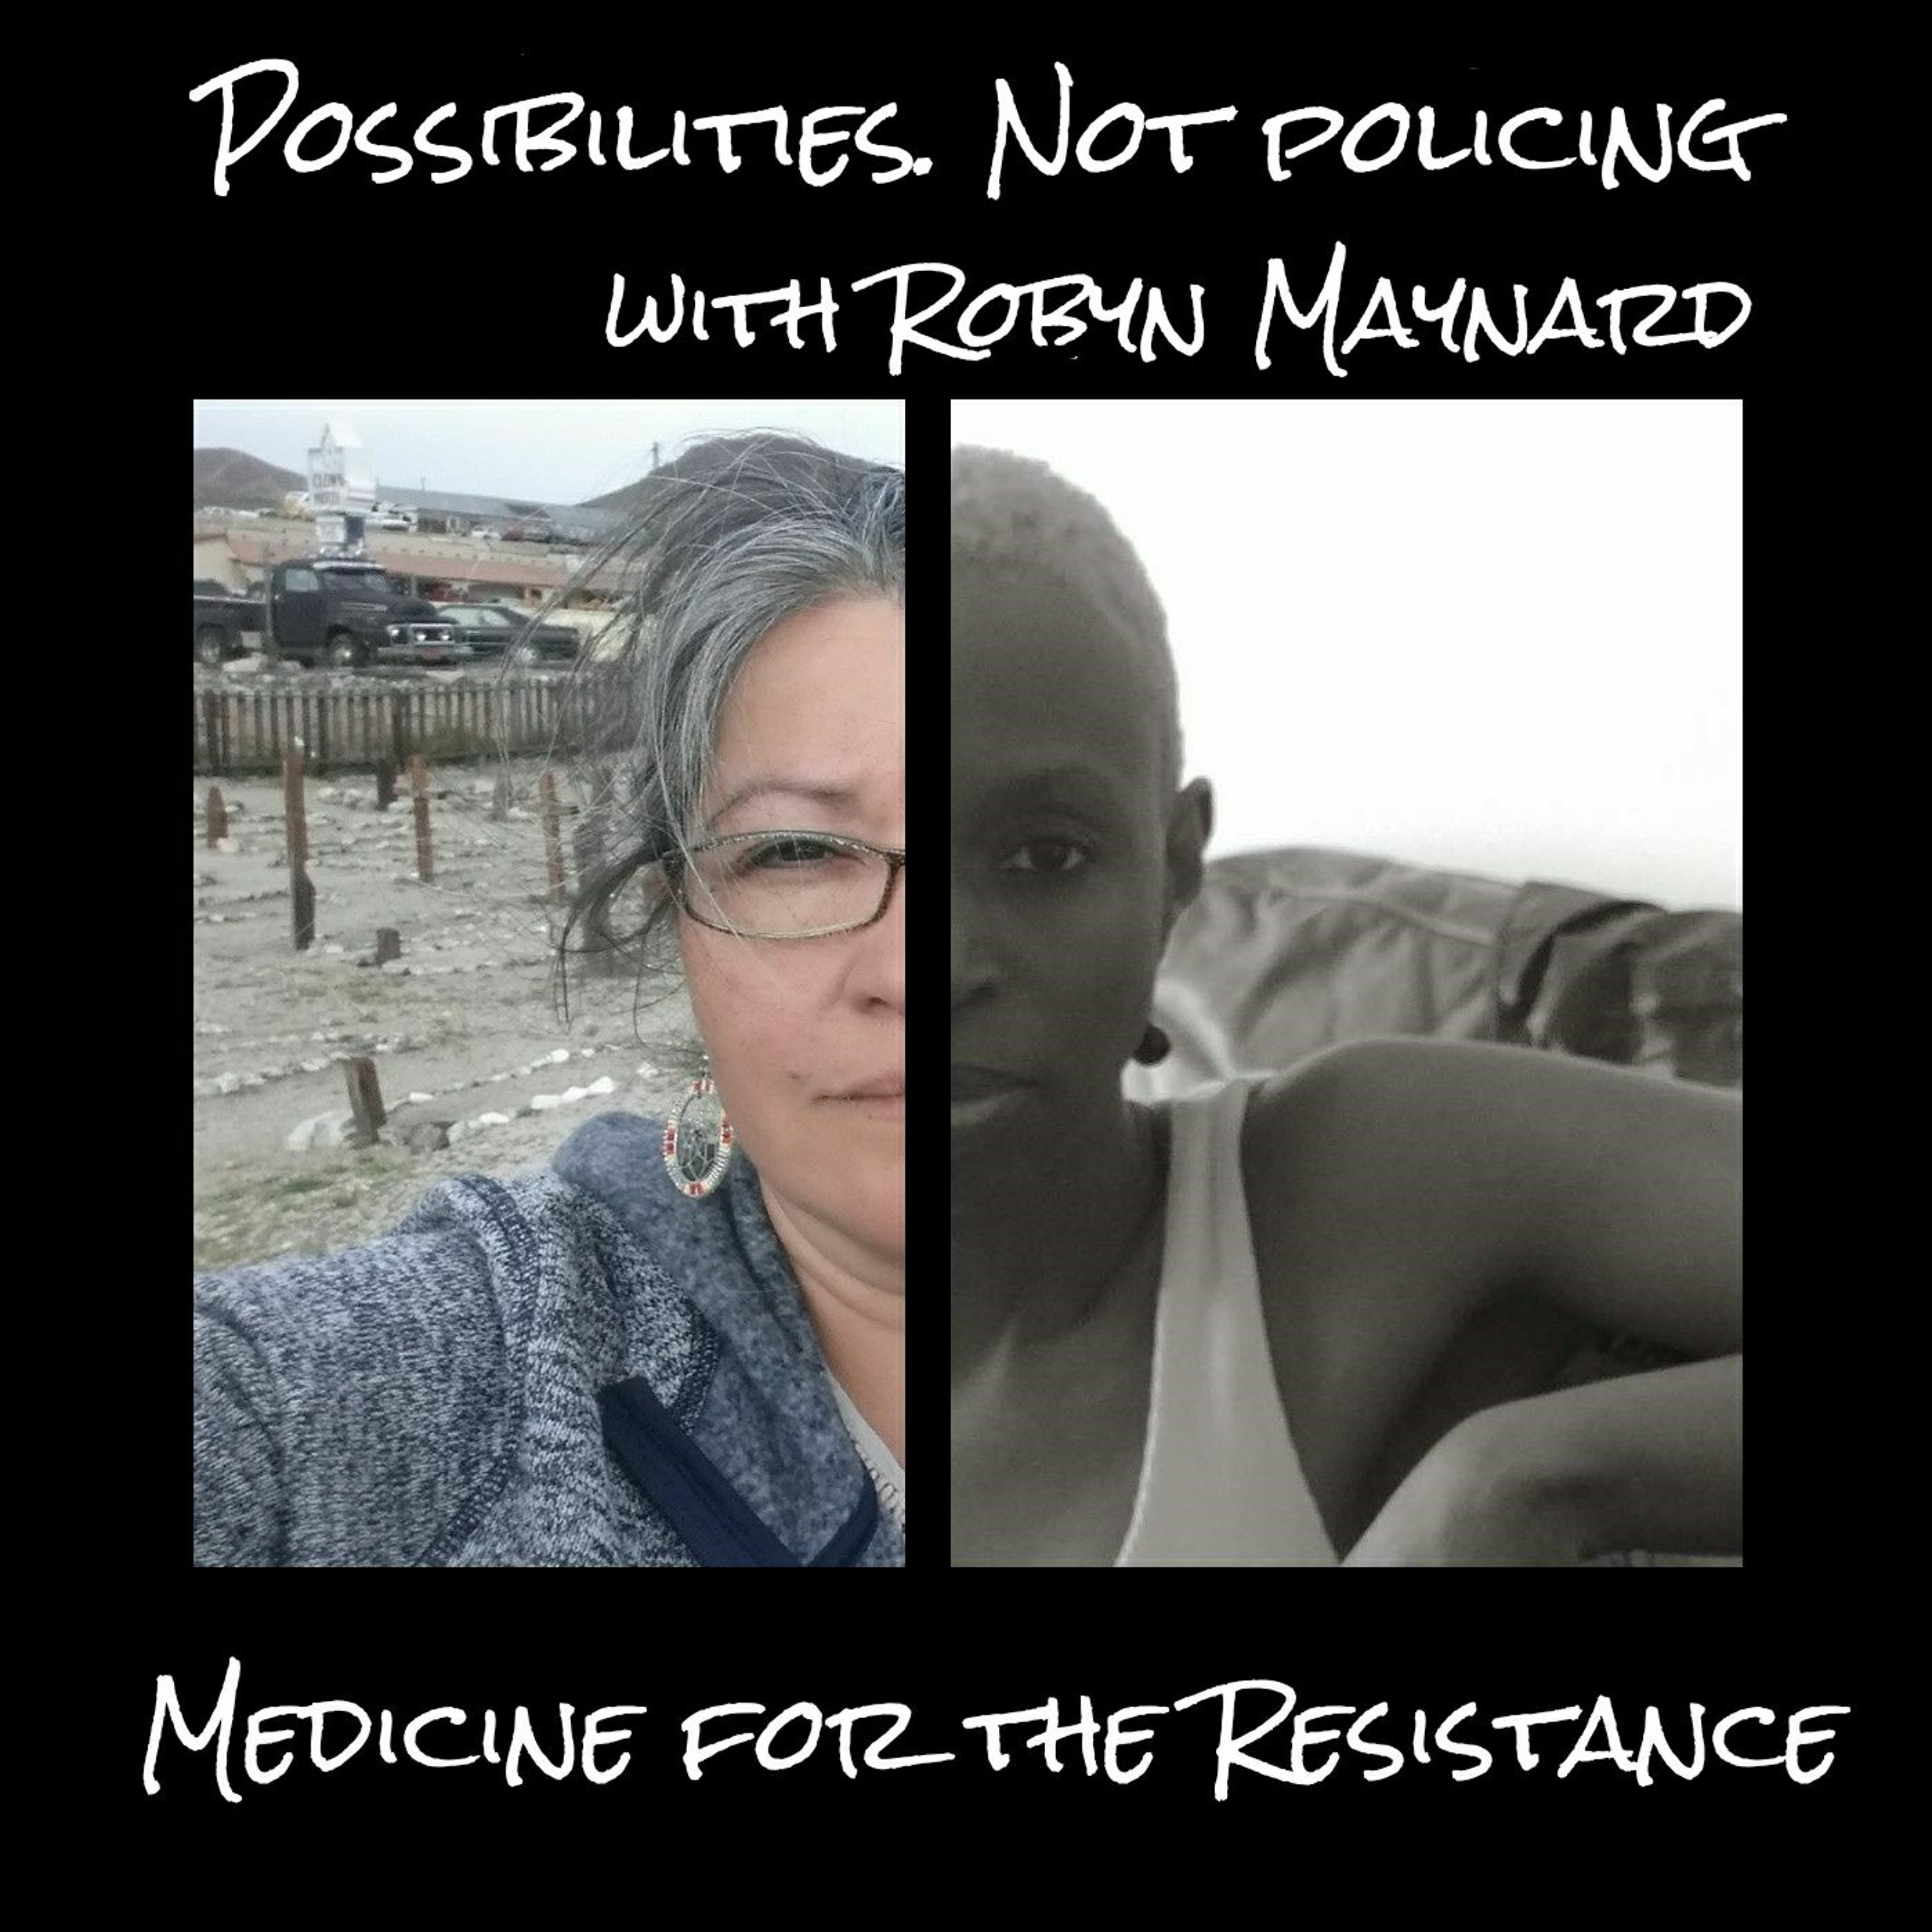 Possibilities, not policing  with Robyn Maynard